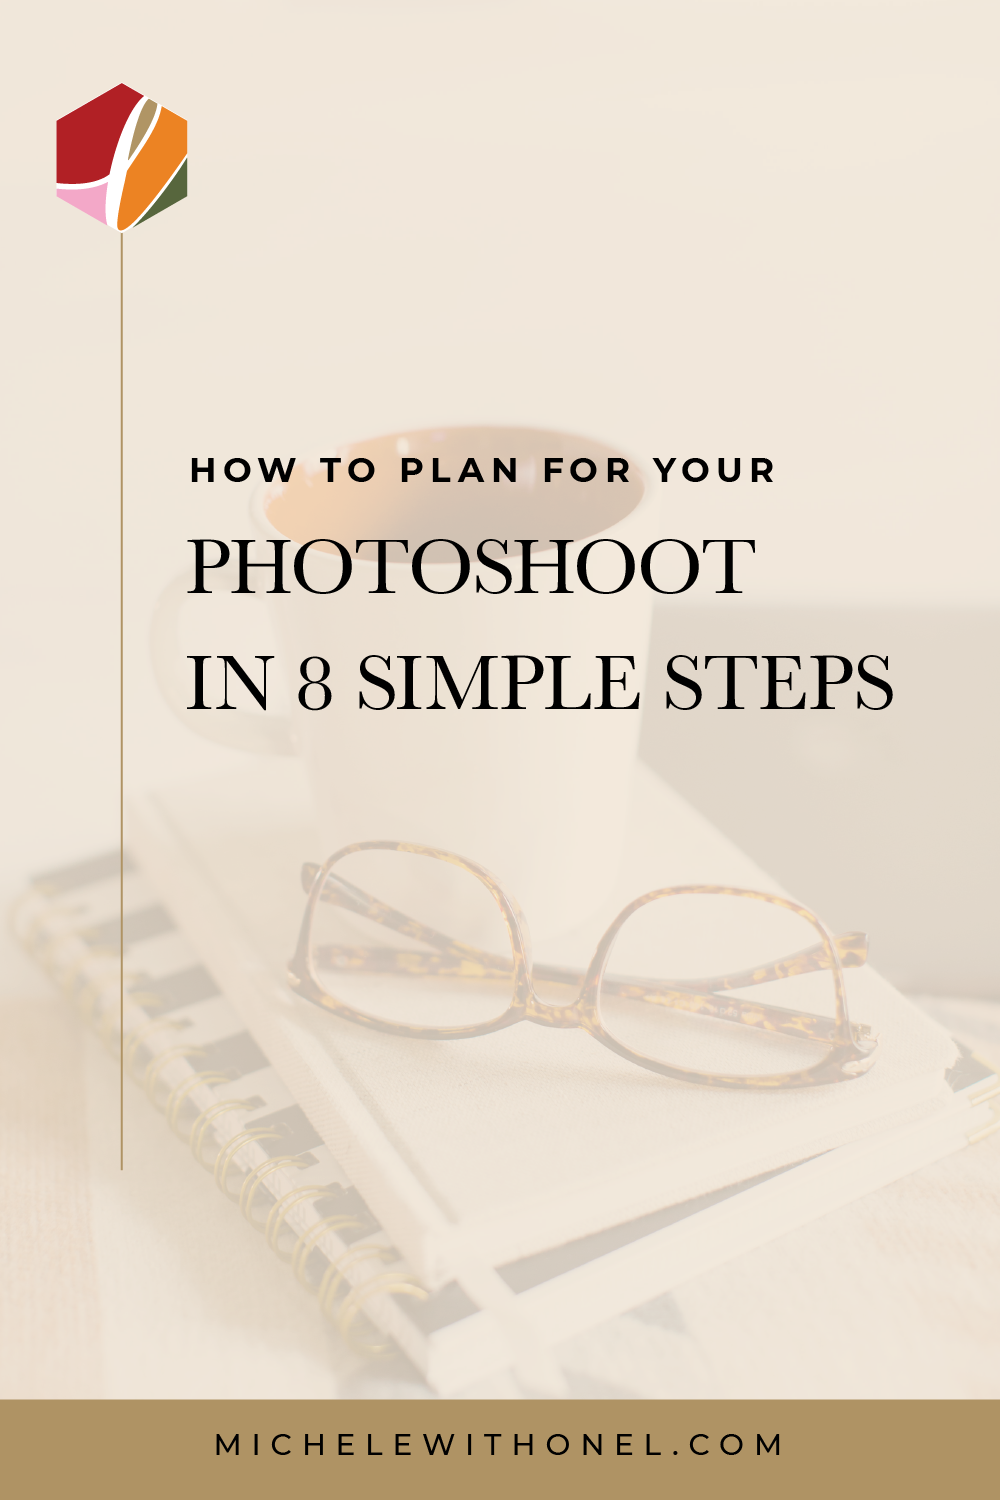 Need some help planning a photoshoot? This post is for you! Prep for your brand photography session in 8 steps—including choosing a location, selecting your wardrobe, and scheduling hair and makeup. You’ll be well prepared for your professional photoshoot after reading this! #branding #photography #business #headshots